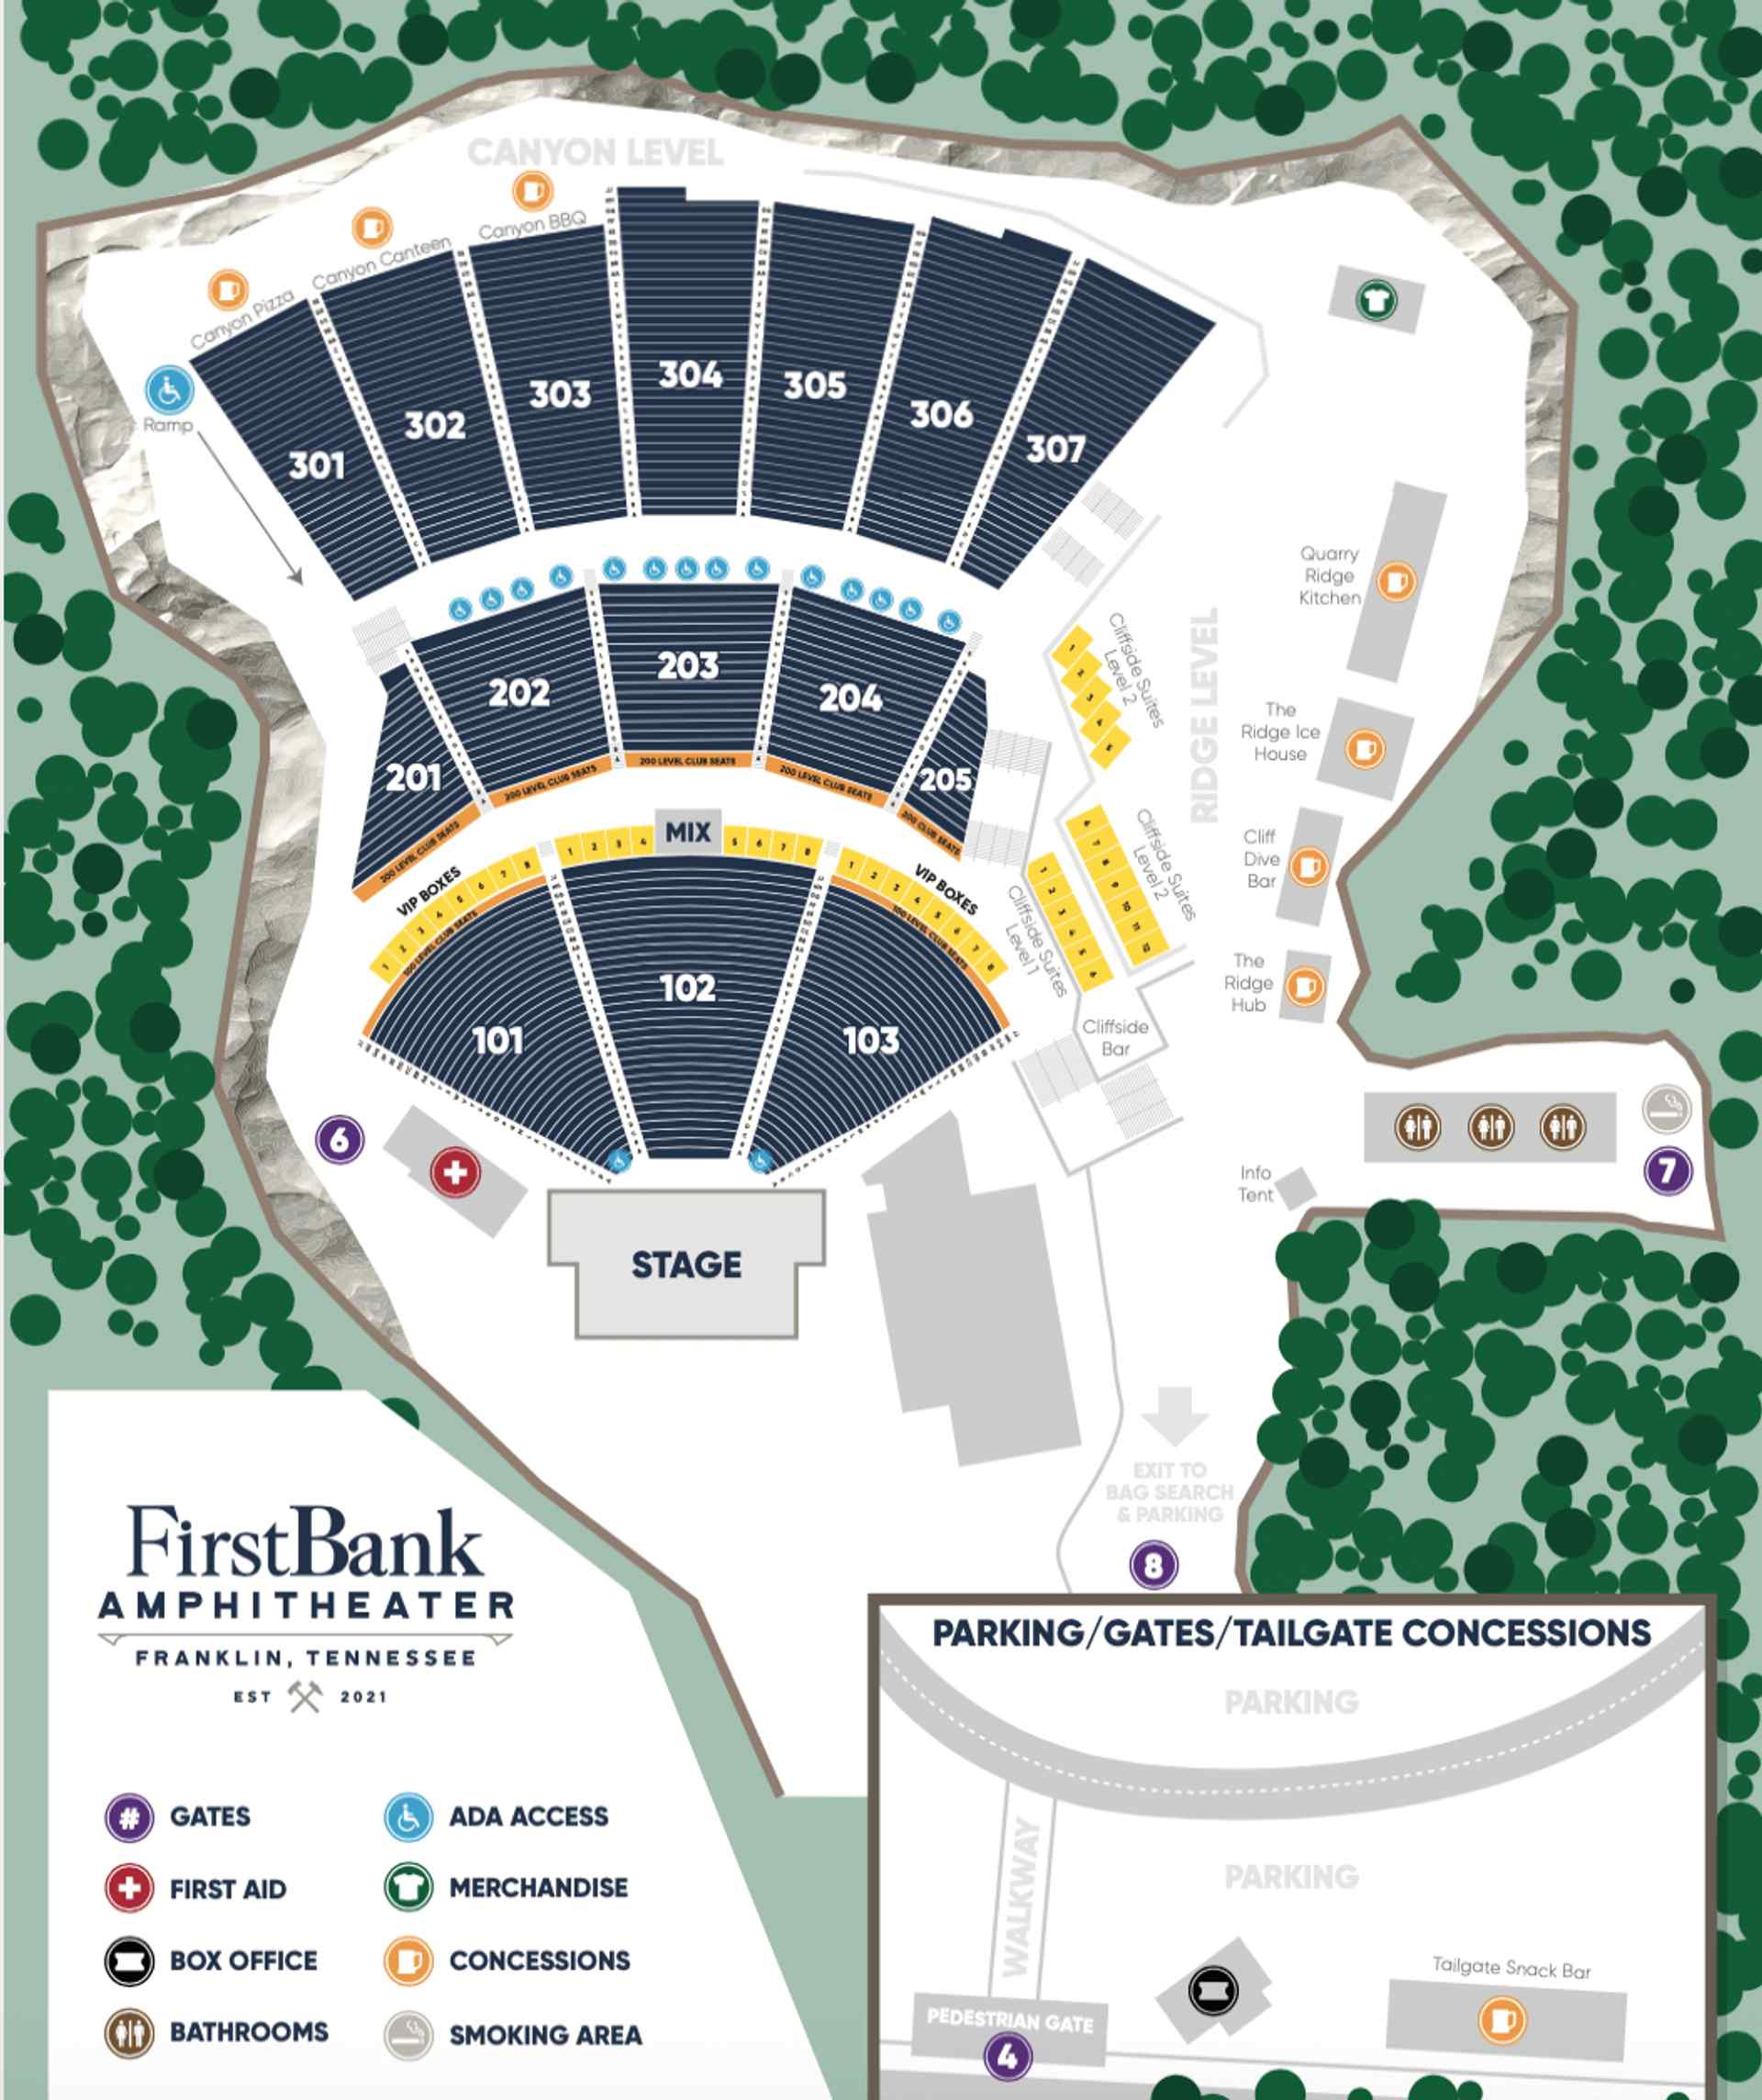 Image of amphitheater seating map